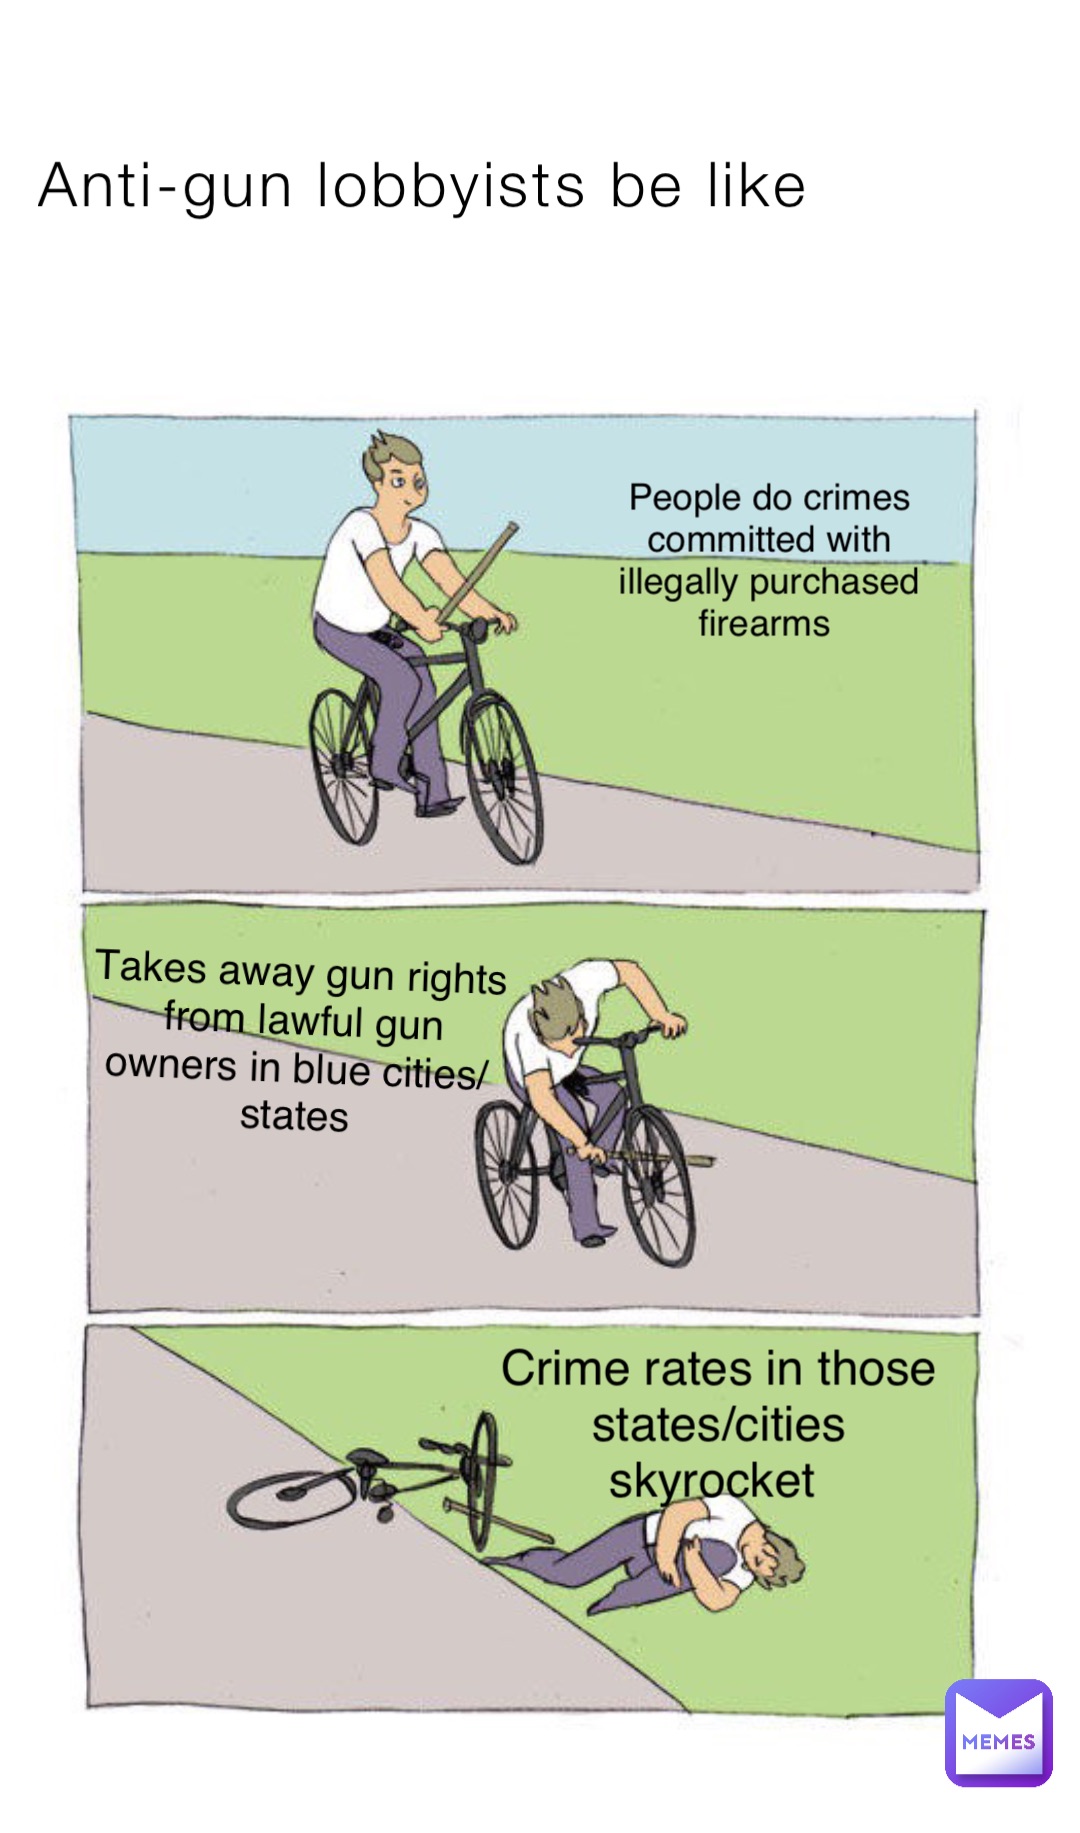 Anti-gun lobbyists be like People do crimes committed with illegally purchased firearms Takes away gun rights from lawful gun owners in blue cities/states Crime rates in those states/cities skyrocket